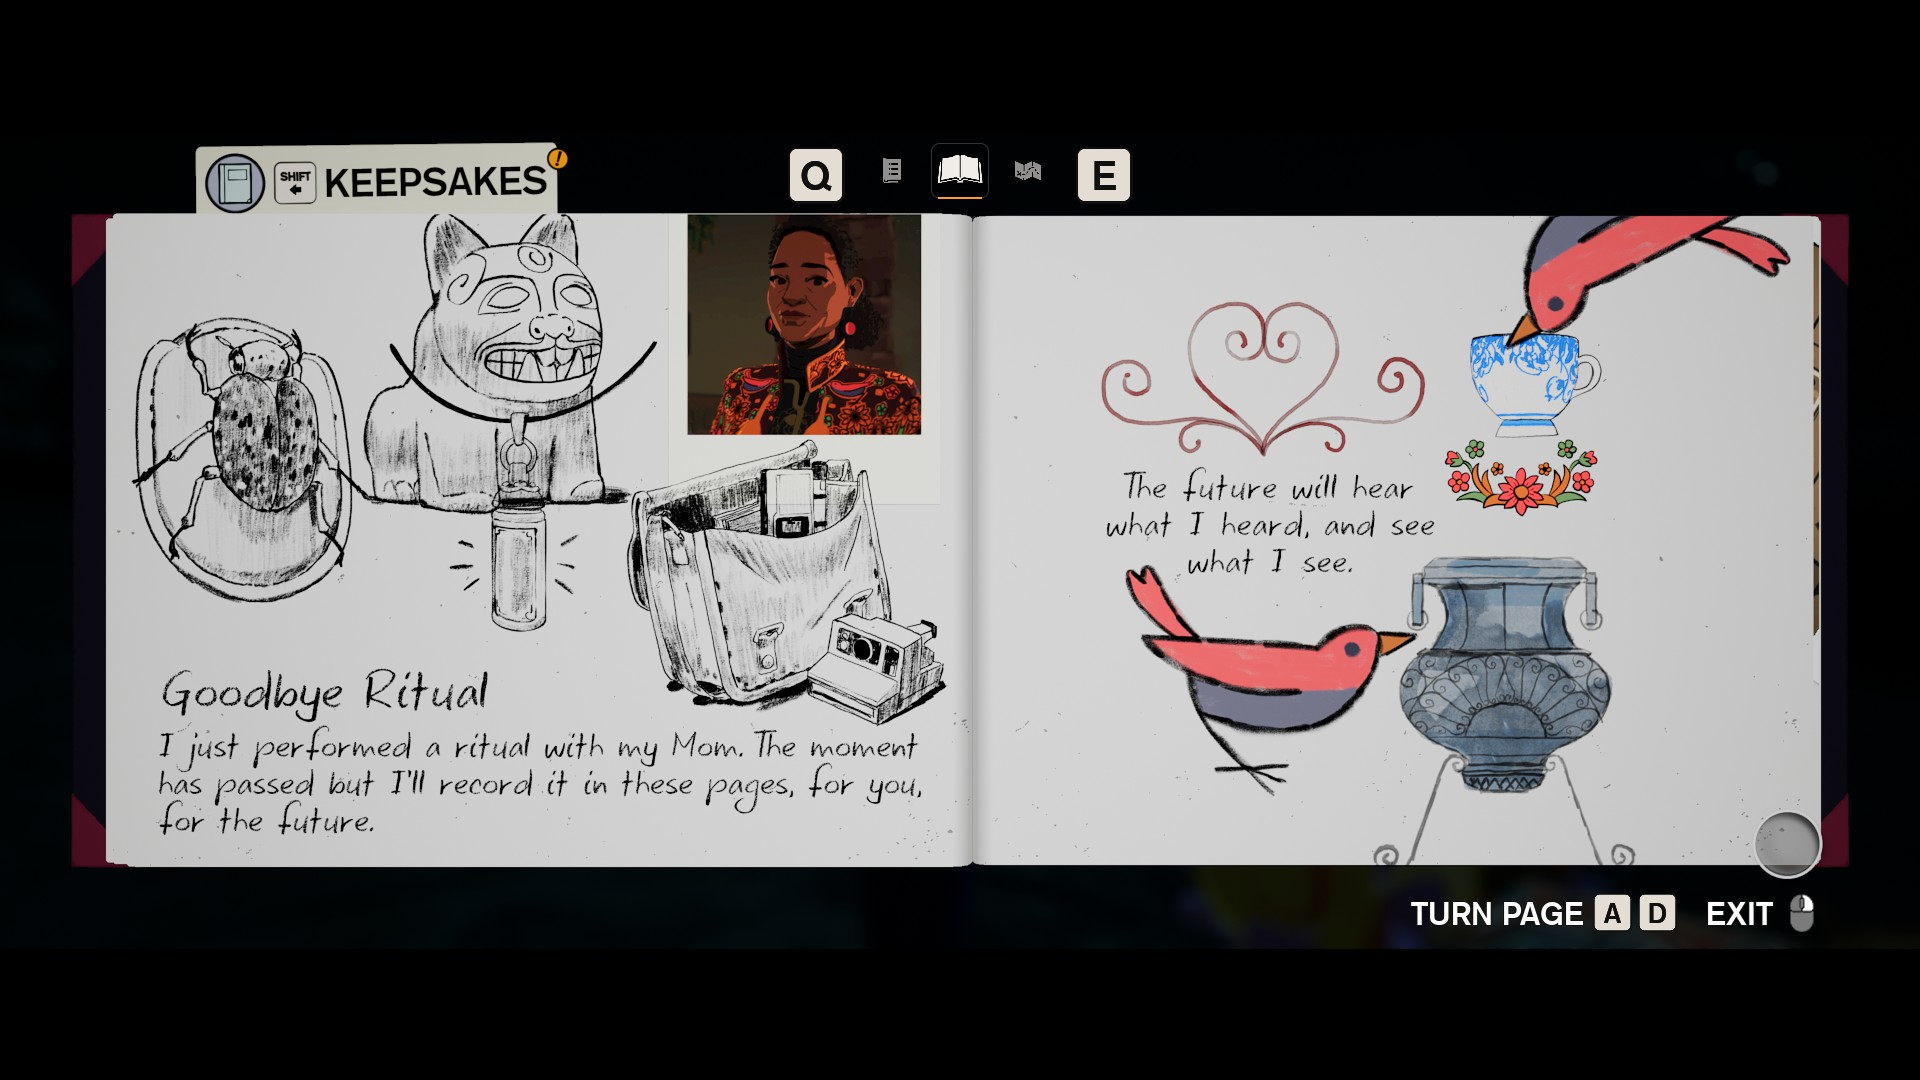 screenshot from the game Season, showing the in-game scrapbook pages